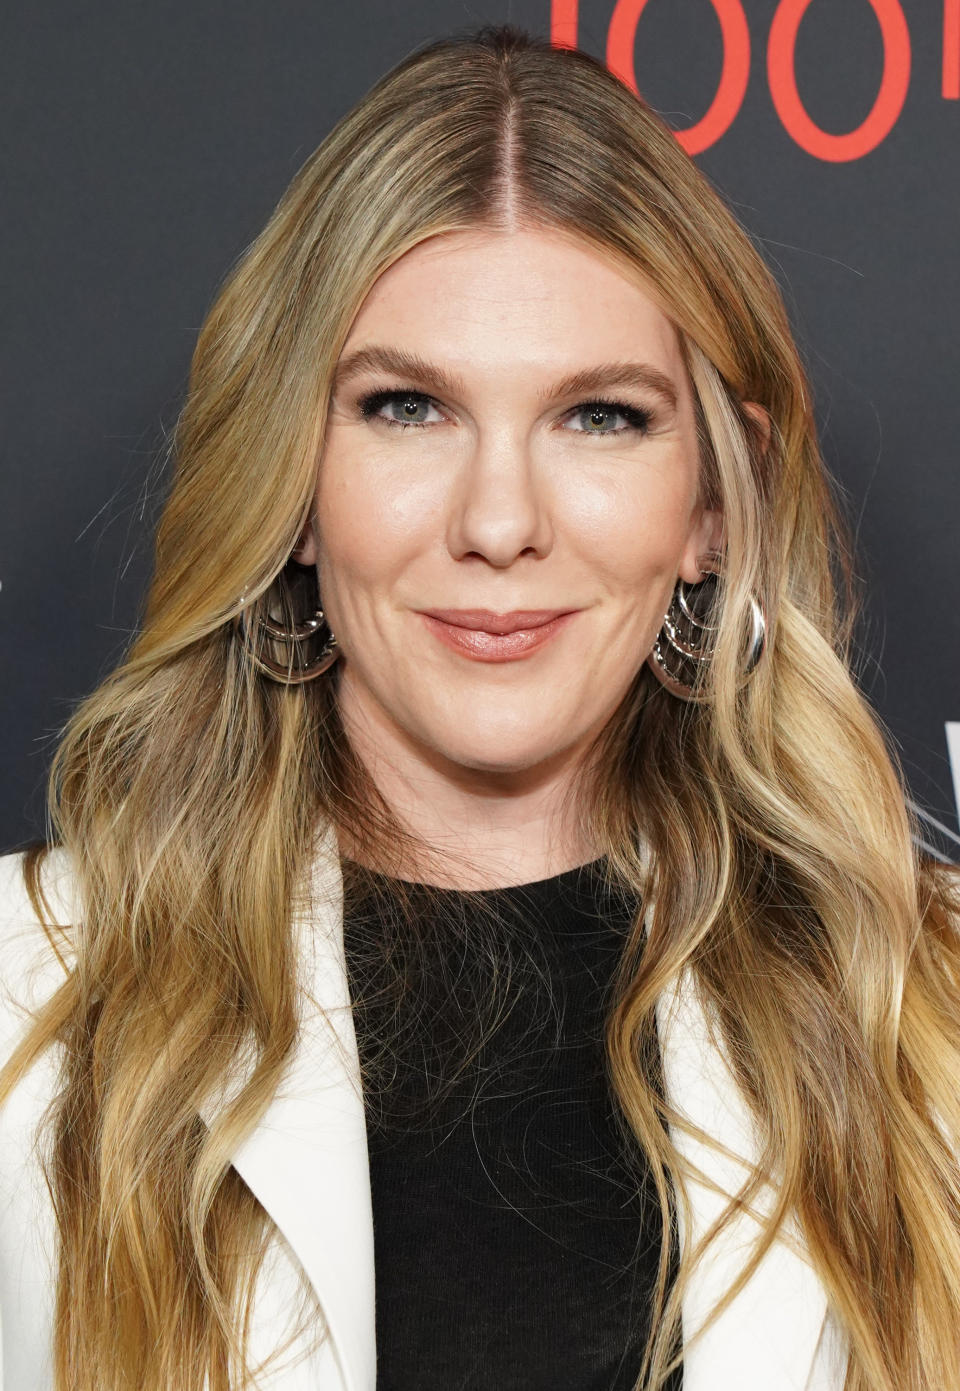 Lily Rabe on the red carpet